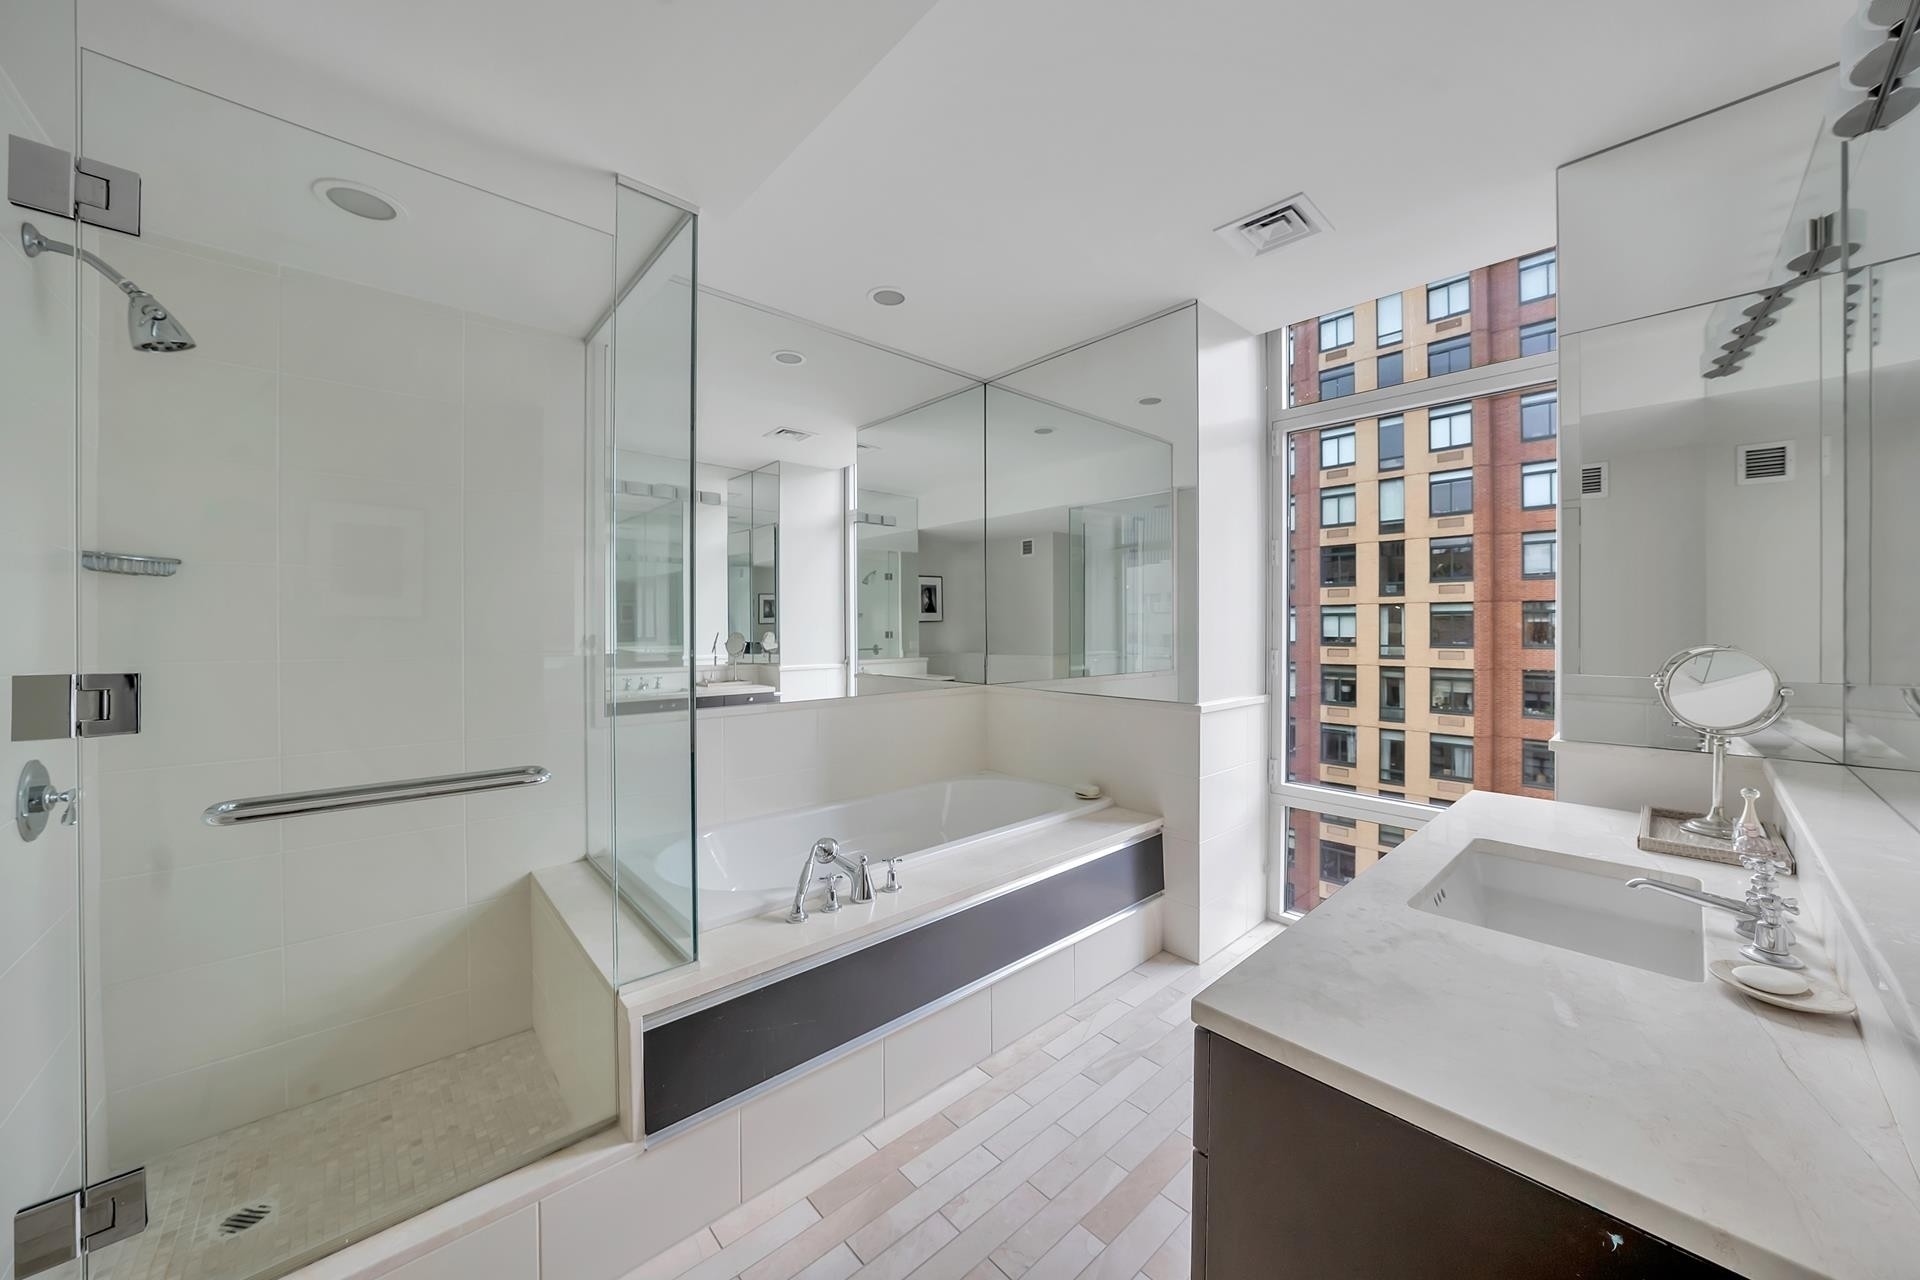 8. Condominiums for Sale at Place 57, 207 E 57TH ST, 19B Midtown East, New York, NY 10022